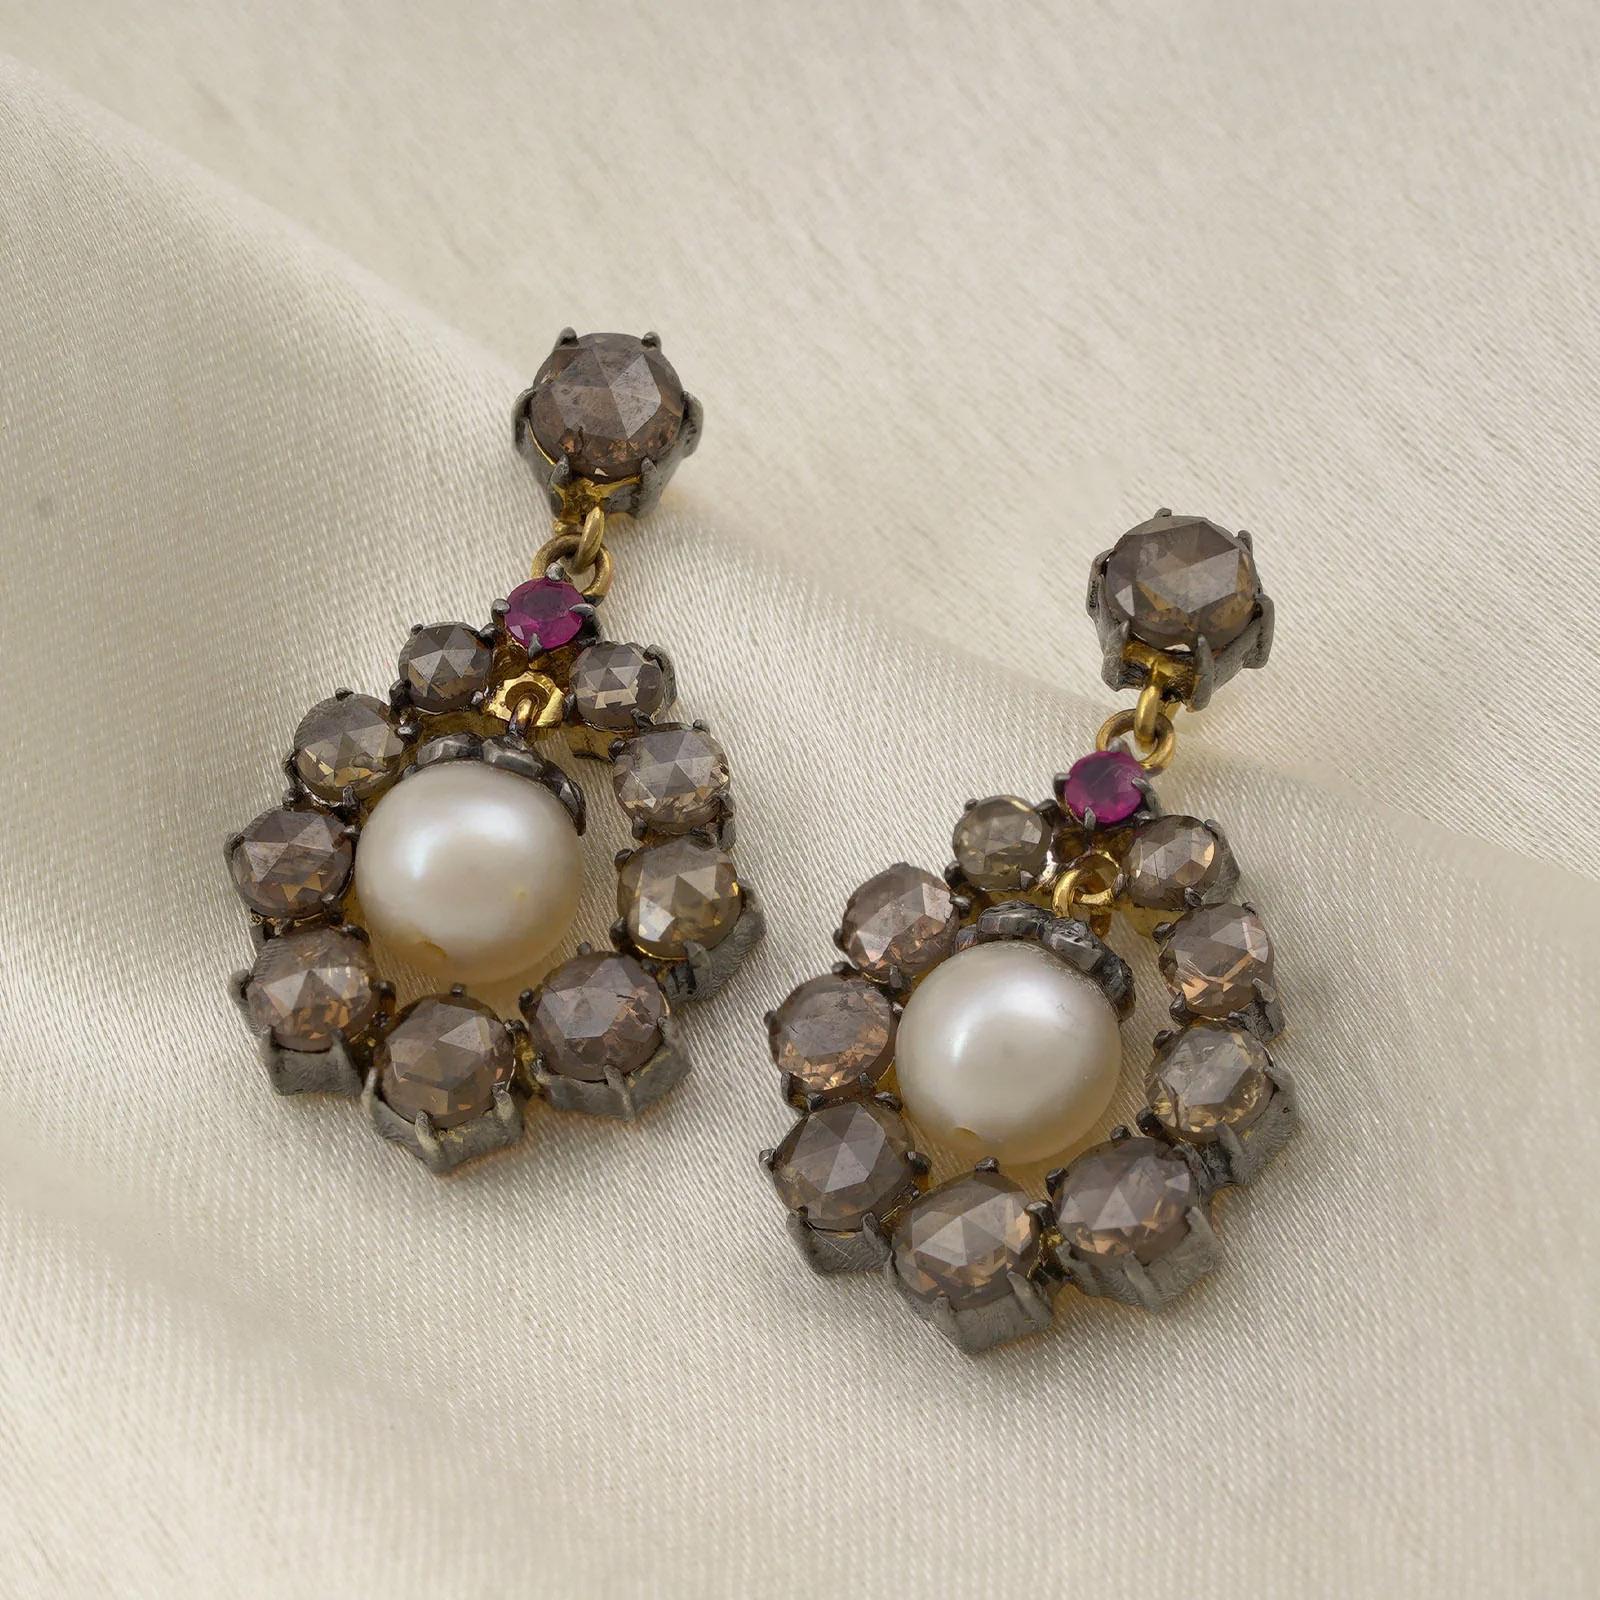 Gold(14K): 3.05g
Rose-cut Diamonds: 4.00ct
Gemstones : Ruby, Chinese Cultured Pearls
925 Silver

Bringing back the old world charm of rose-cut diamonds that were first found in India and made popular in the Victorian era, this pair of earrings uses